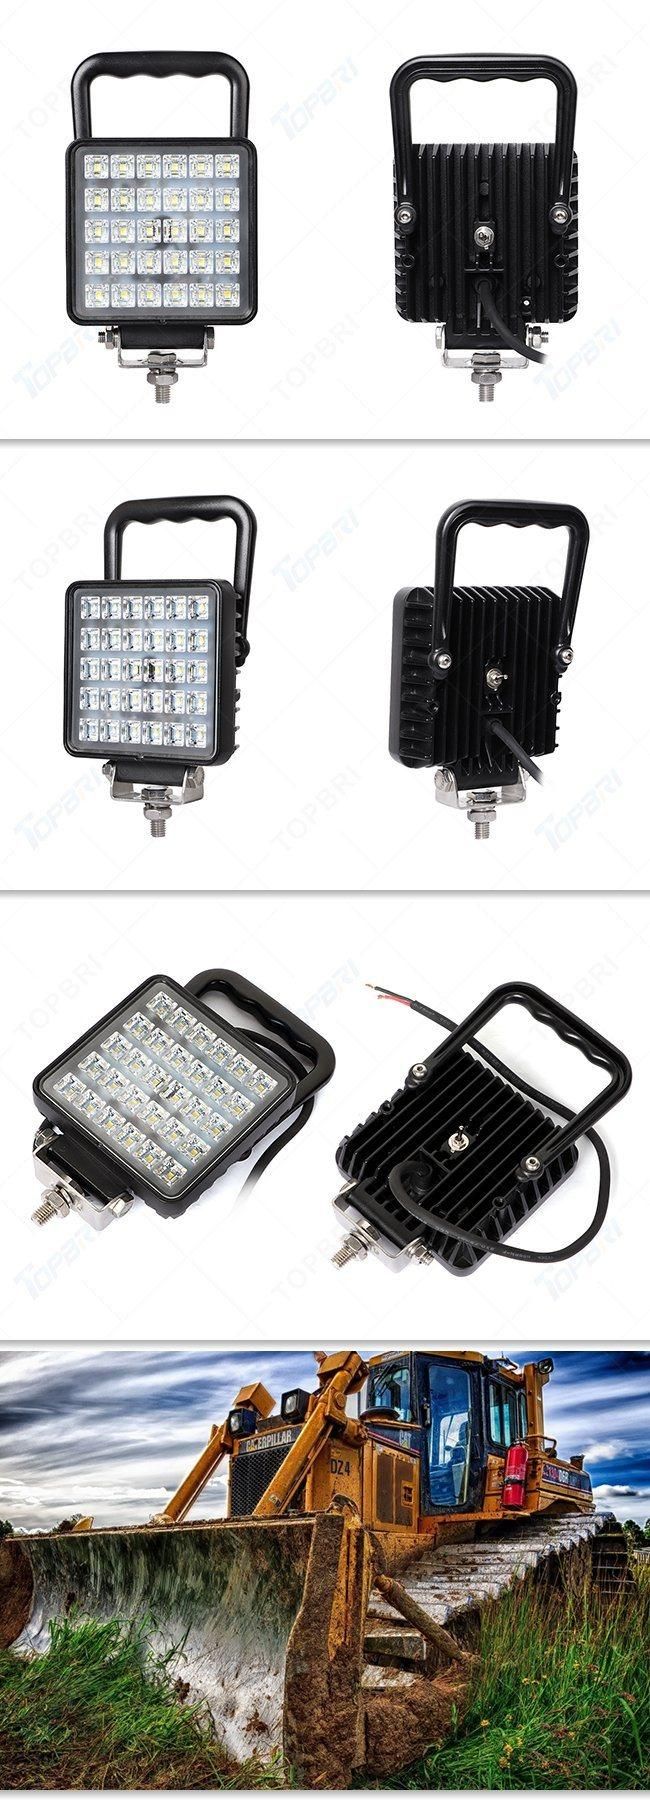 Portable 45W LED Work Light for Truck Trailer Construction Site Auto